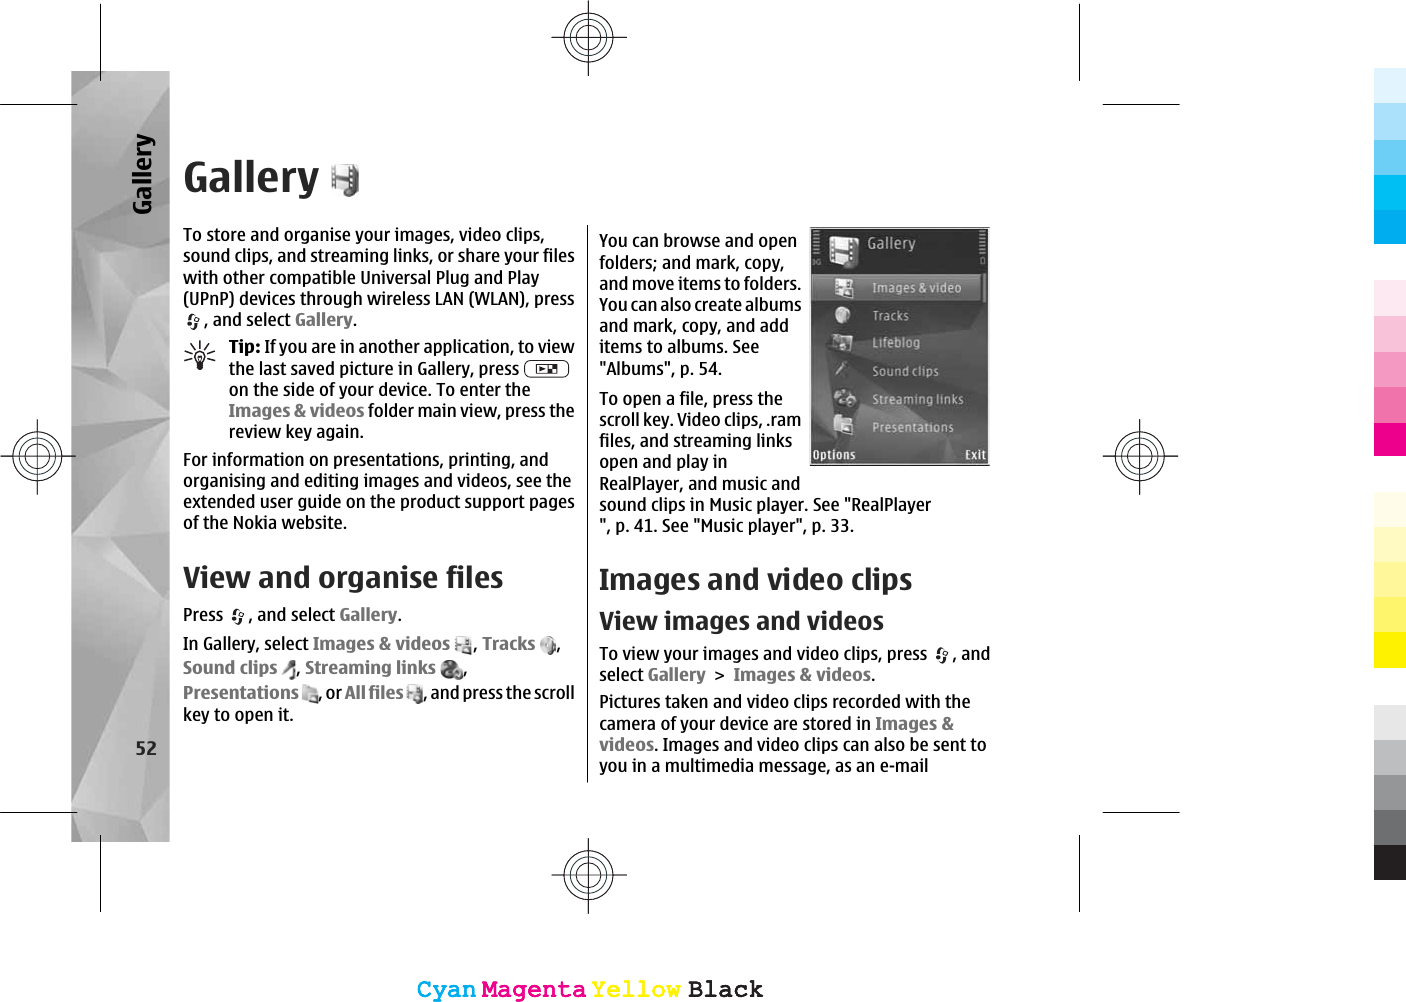 GalleryTo store and organise your images, video clips,sound clips, and streaming links, or share your fileswith other compatible Universal Plug and Play(UPnP) devices through wireless LAN (WLAN), press, and select Gallery.Tip: If you are in another application, to viewthe last saved picture in Gallery, press on the side of your device. To enter theImages &amp; videos folder main view, press thereview key again.For information on presentations, printing, andorganising and editing images and videos, see theextended user guide on the product support pagesof the Nokia website.View and organise filesPress , and select Gallery.In Gallery, select Images &amp; videos ,Tracks ,Sound clips ,Streaming links ,Presentations , or All files , and press the scrollkey to open it.You can browse and openfolders; and mark, copy,and move items to folders.You can also create albumsand mark, copy, and additems to albums. See&quot;Albums&quot;, p. 54.To open a file, press thescroll key. Video clips, .ramfiles, and streaming linksopen and play inRealPlayer, and music andsound clips in Music player. See &quot;RealPlayer&quot;, p. 41. See &quot;Music player&quot;, p. 33.Images and video clipsView images and videosTo view your images and video clips, press  , andselect GalleryImages &amp; videos.Pictures taken and video clips recorded with thecamera of your device are stored in Images &amp;videos. Images and video clips can also be sent toyou in a multimedia message, as an e-mail52GalleryCyanCyanMagentaMagentaYellowYellowBlackBlackCyanCyanMagentaMagentaYellowYellowBlackBlack